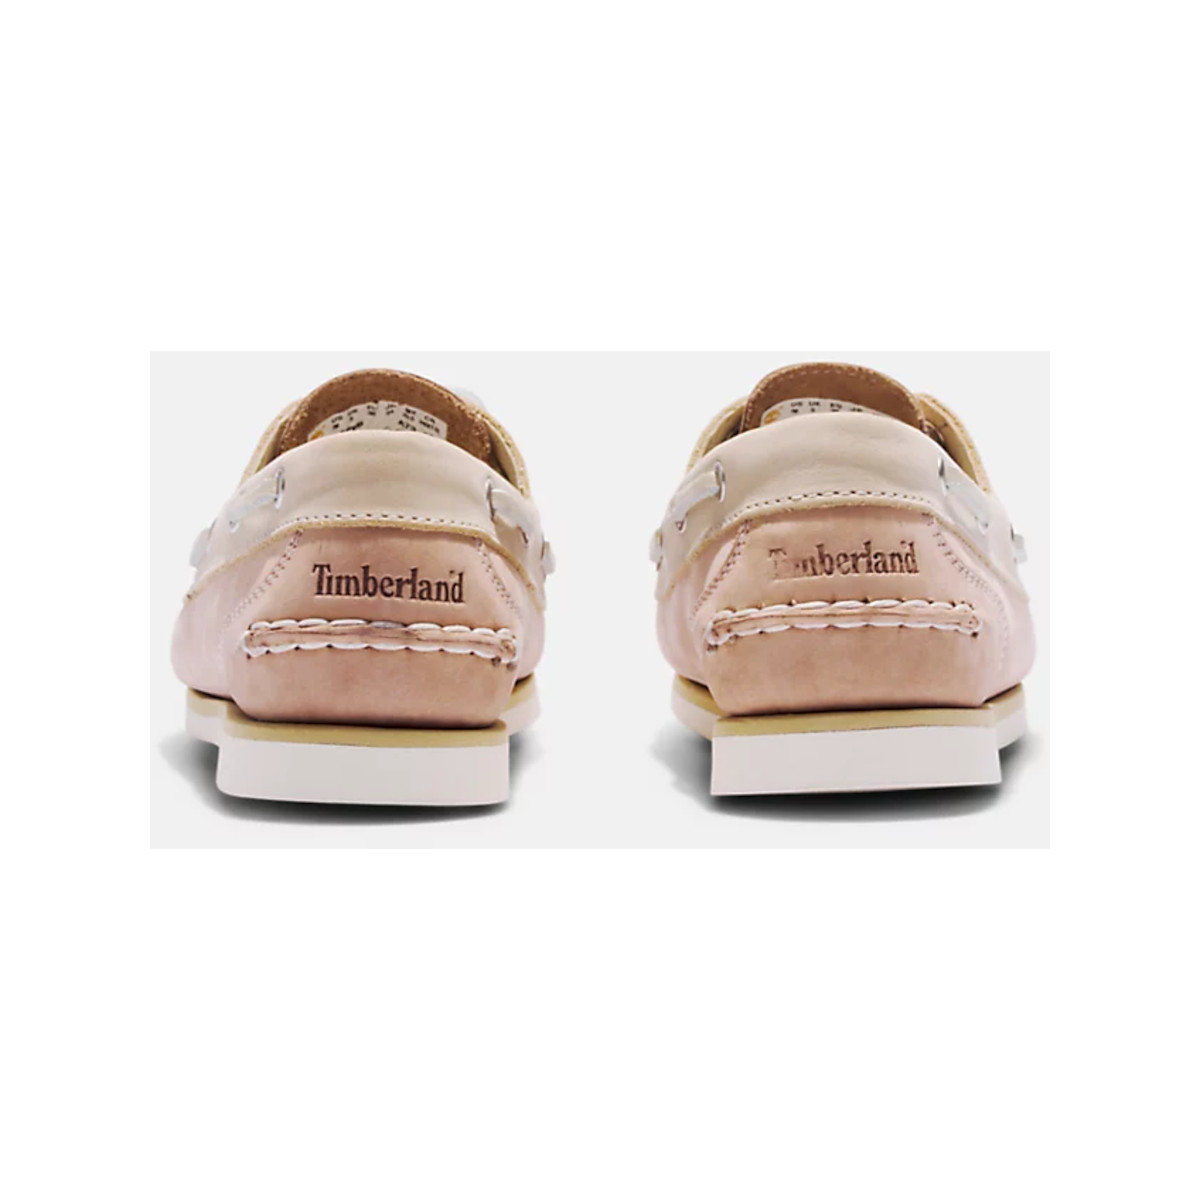 Timberland Classic Boat chaussure bateau femme - beige clair, pointure 37,5